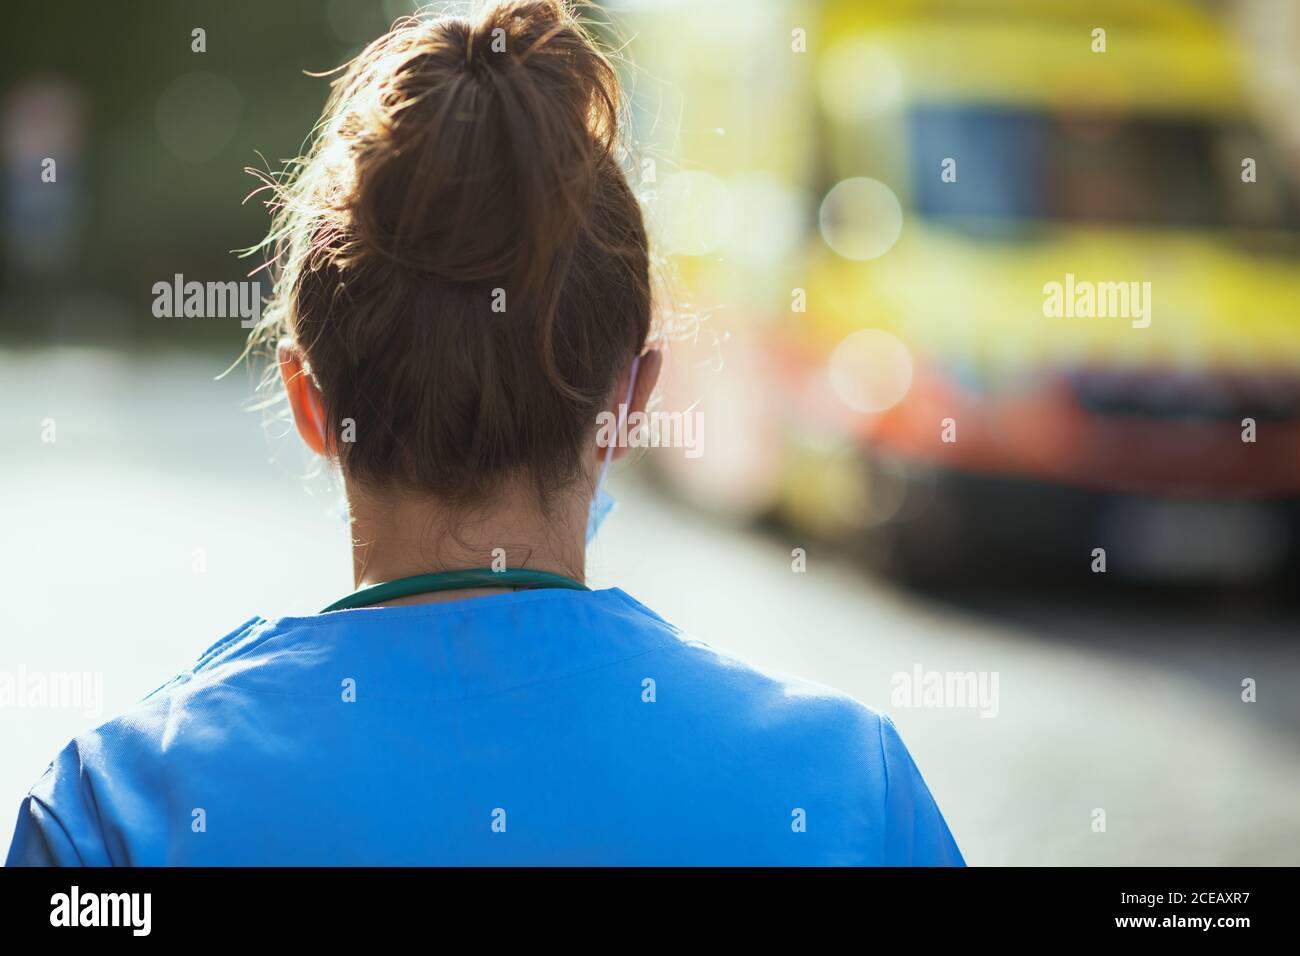 covid-19 pandemic. Seen from behind medical doctor woman in scrubs with medical mask outside near ambulance. Stock Photo